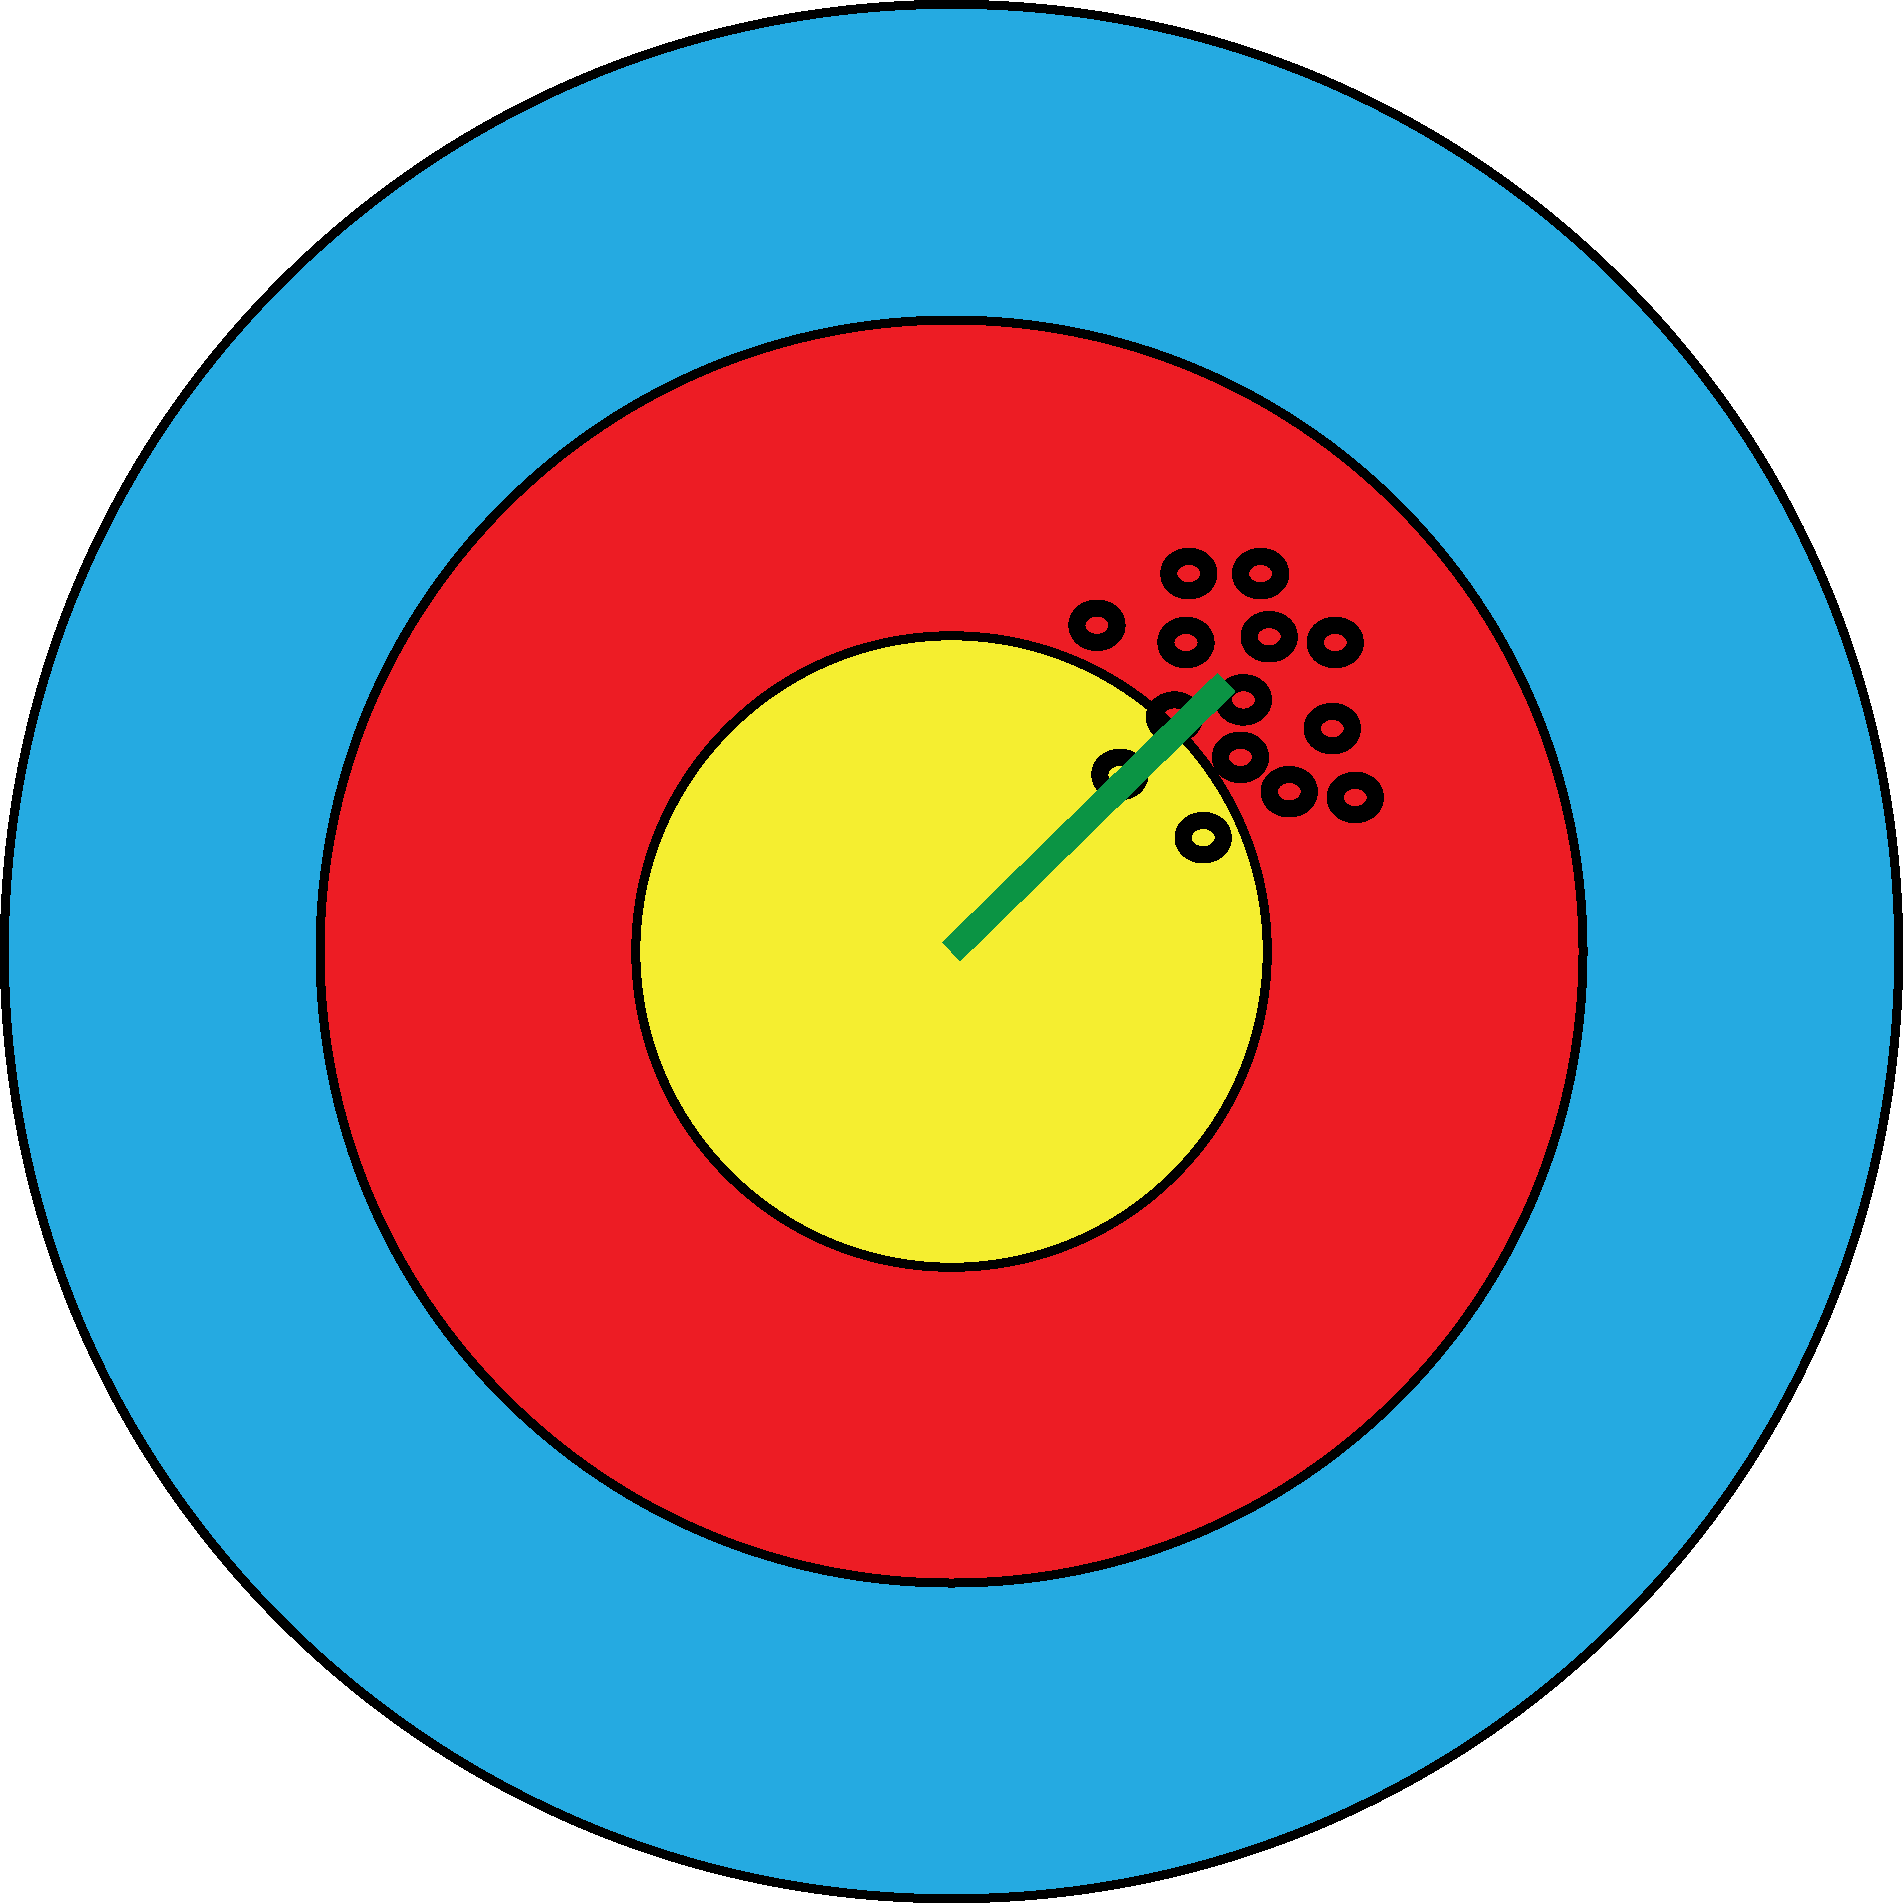 In The Upper Bull's Eye, The Estimates Are Systematically - Himakesja (1903x1903)